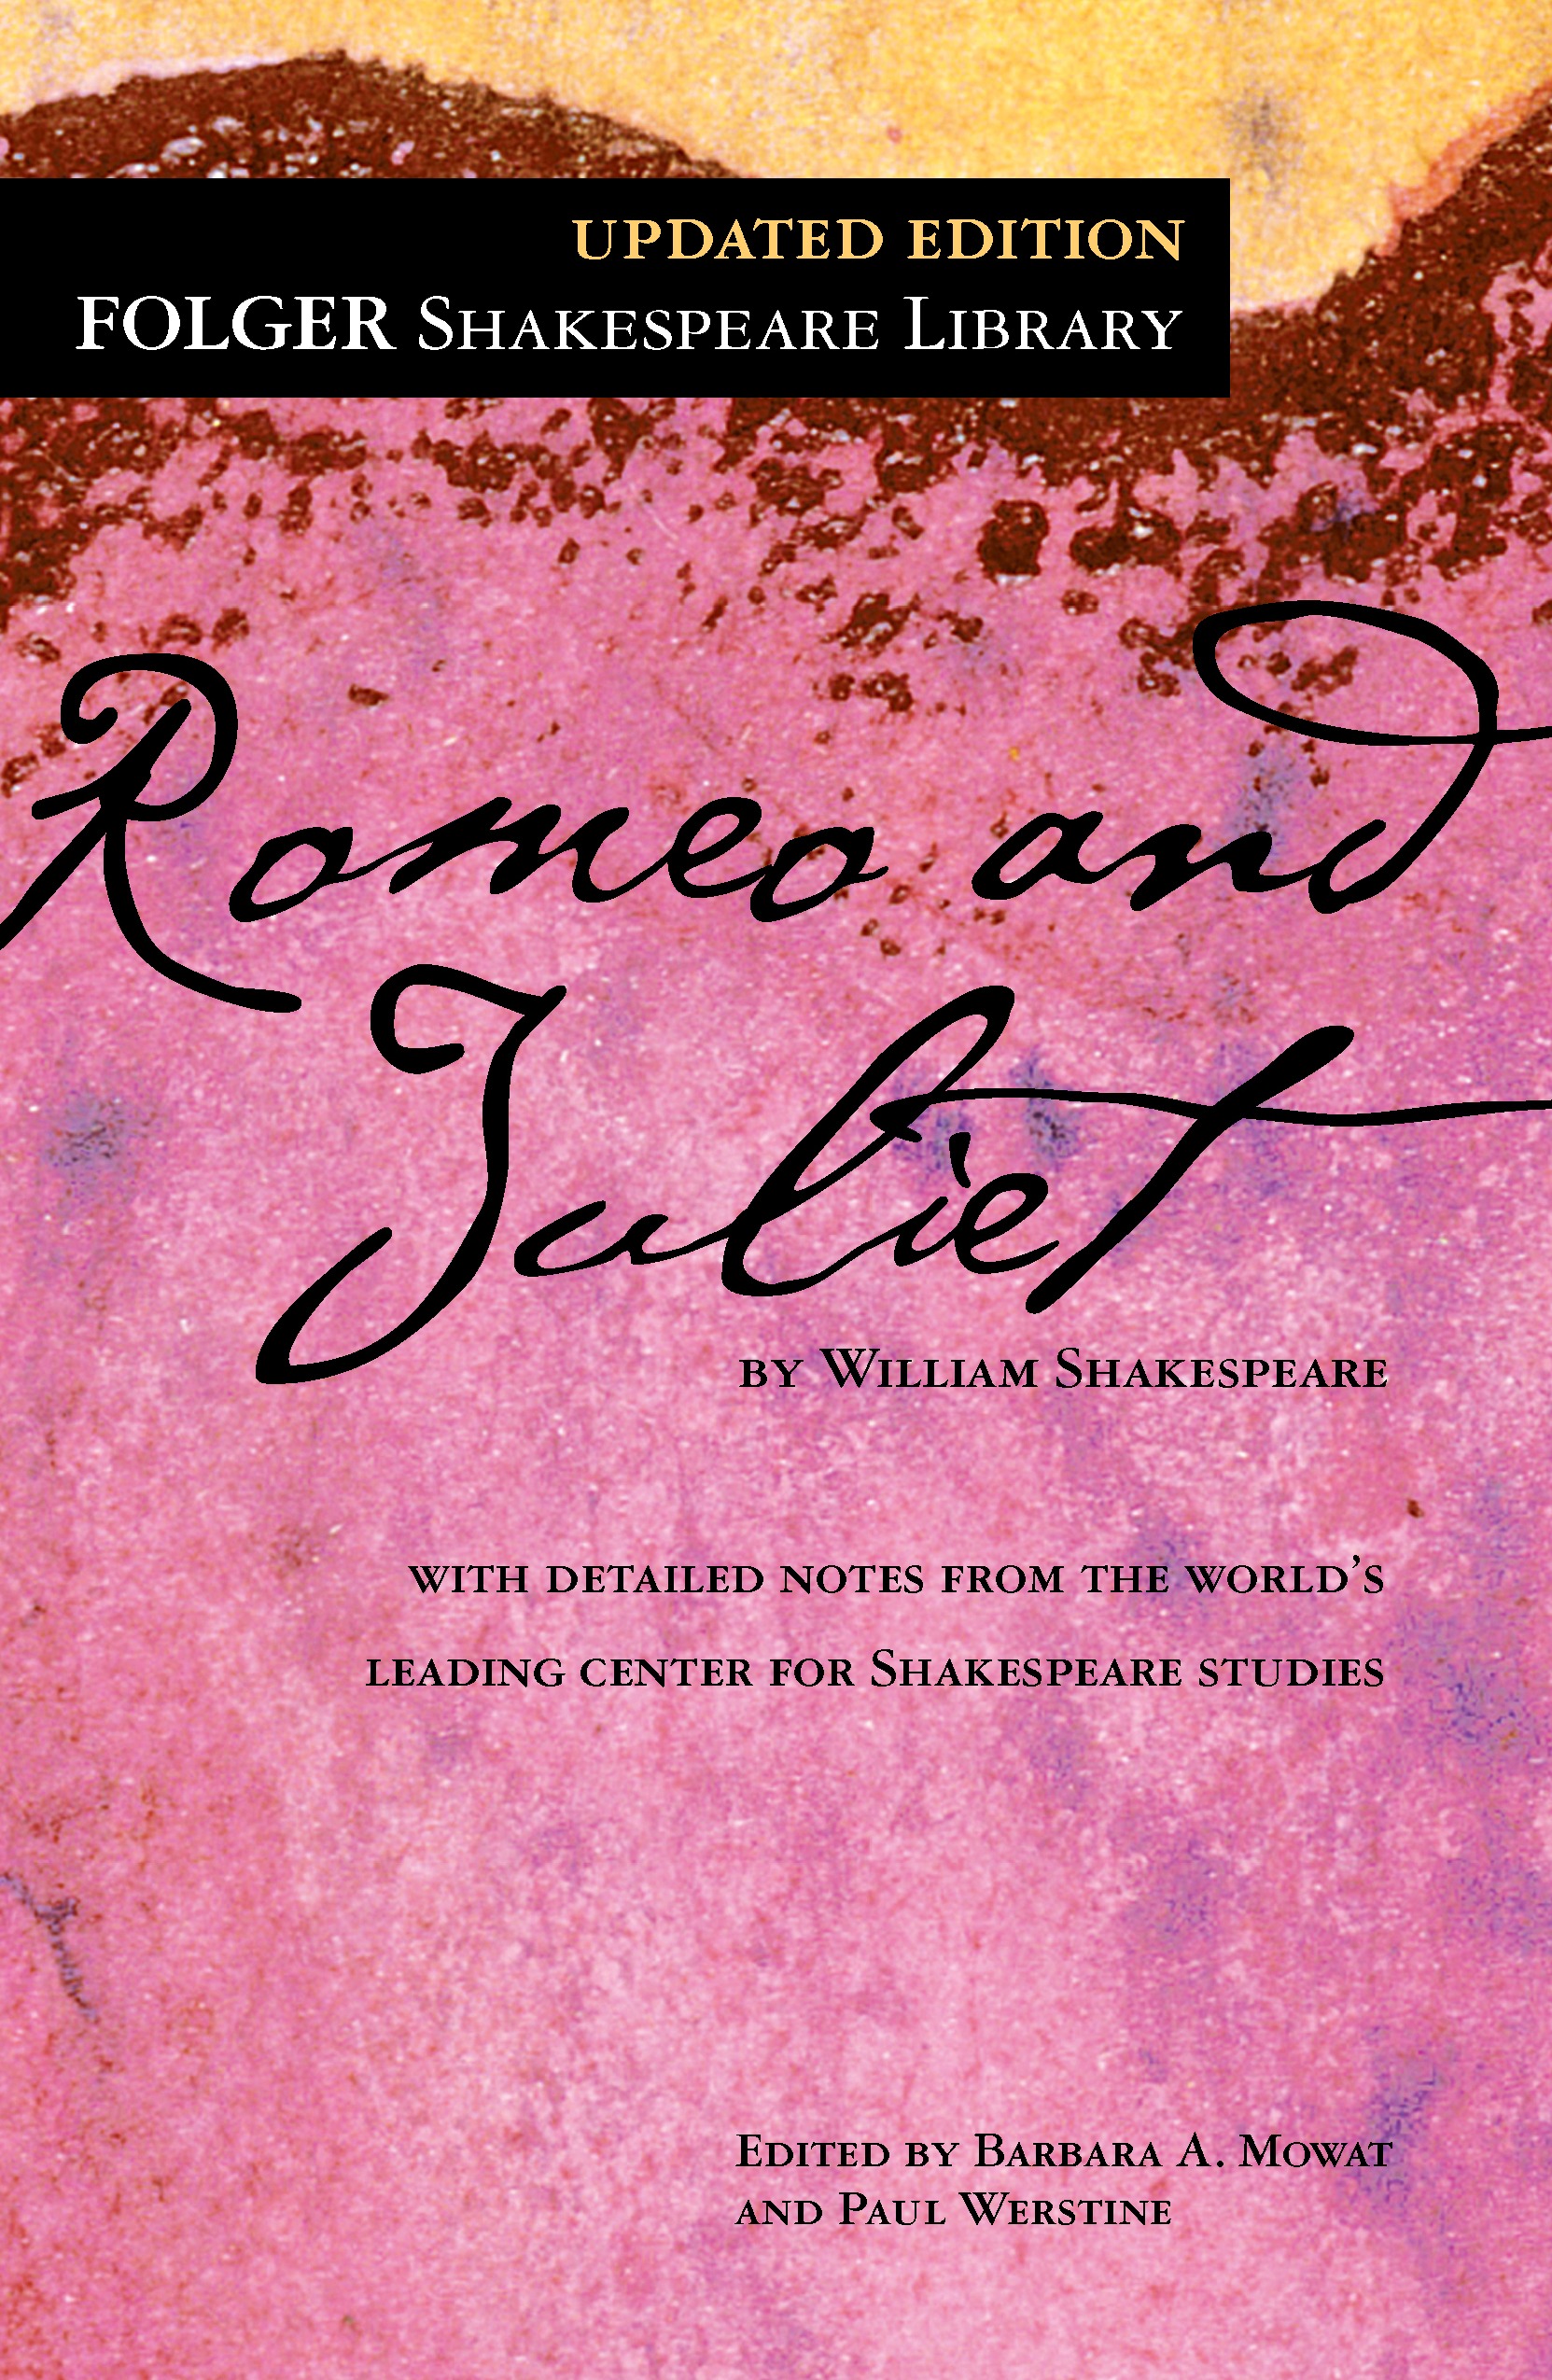 Most interesting book by William Shakespeare is Romeo and Juliet